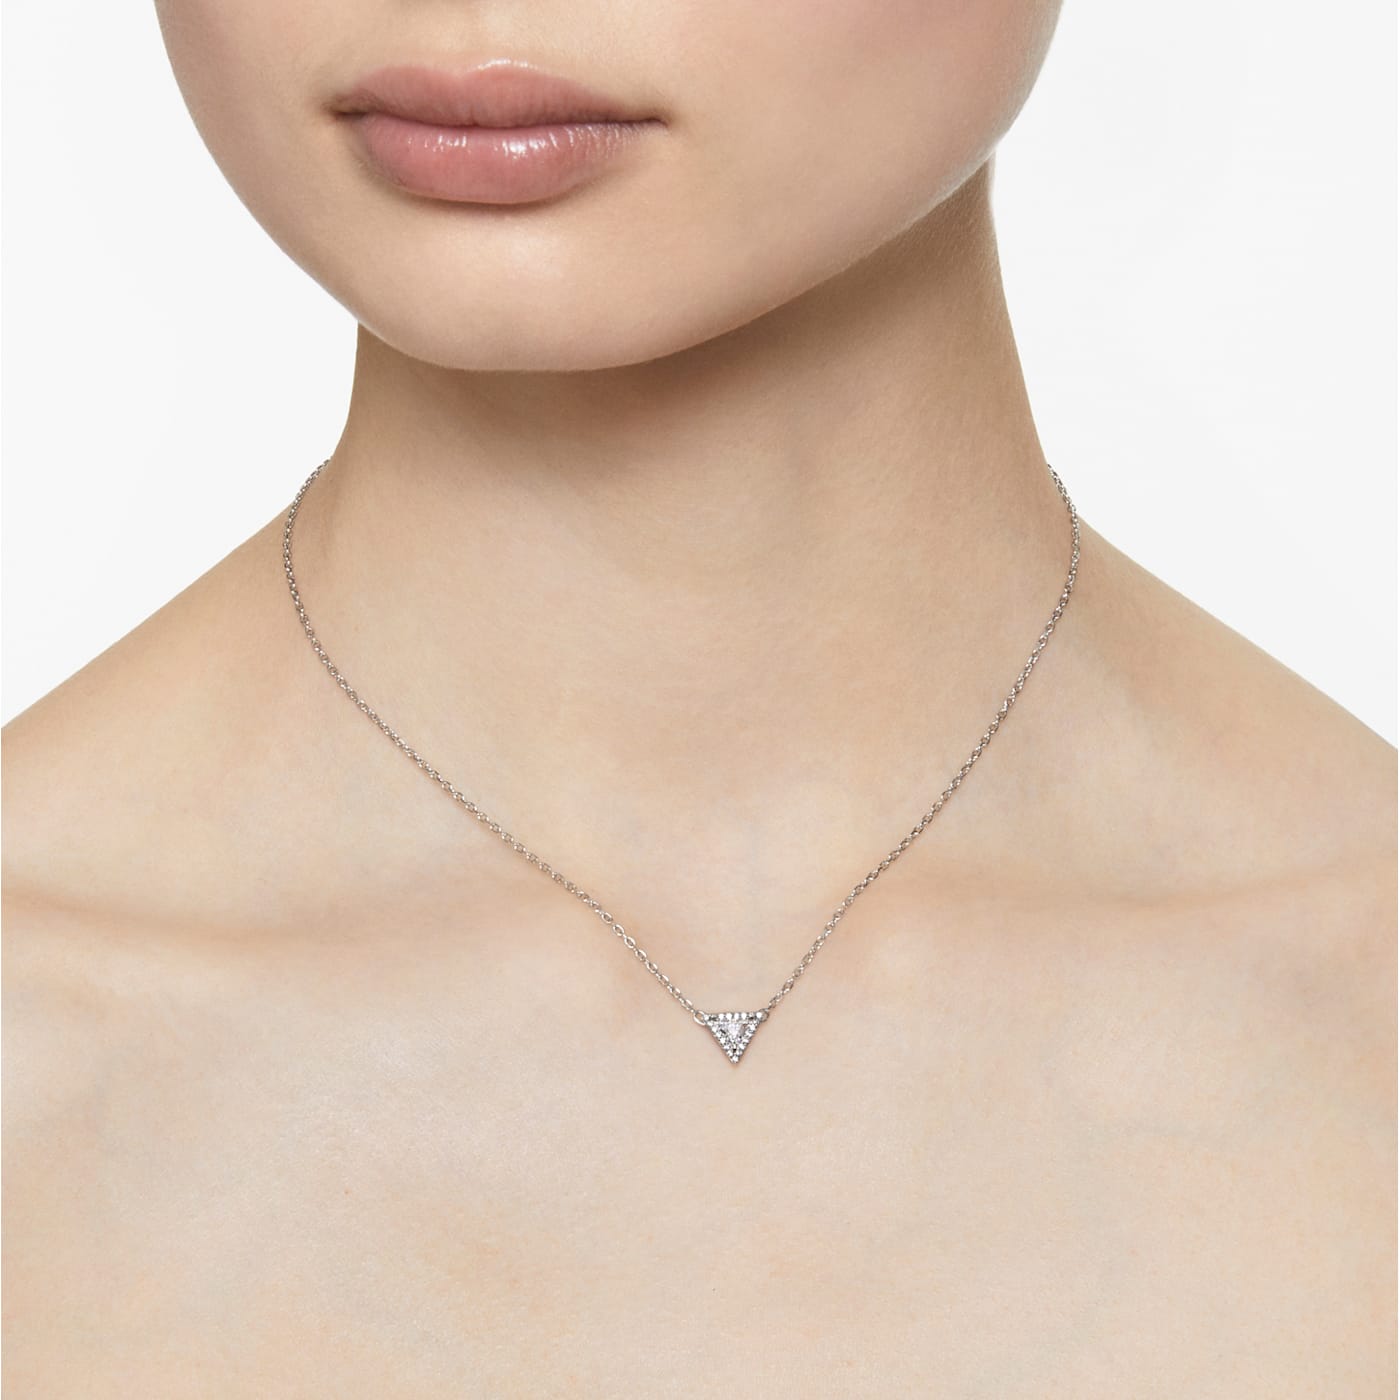 ORTYX NECKLACE, WHITE, RHODIUM PLATED